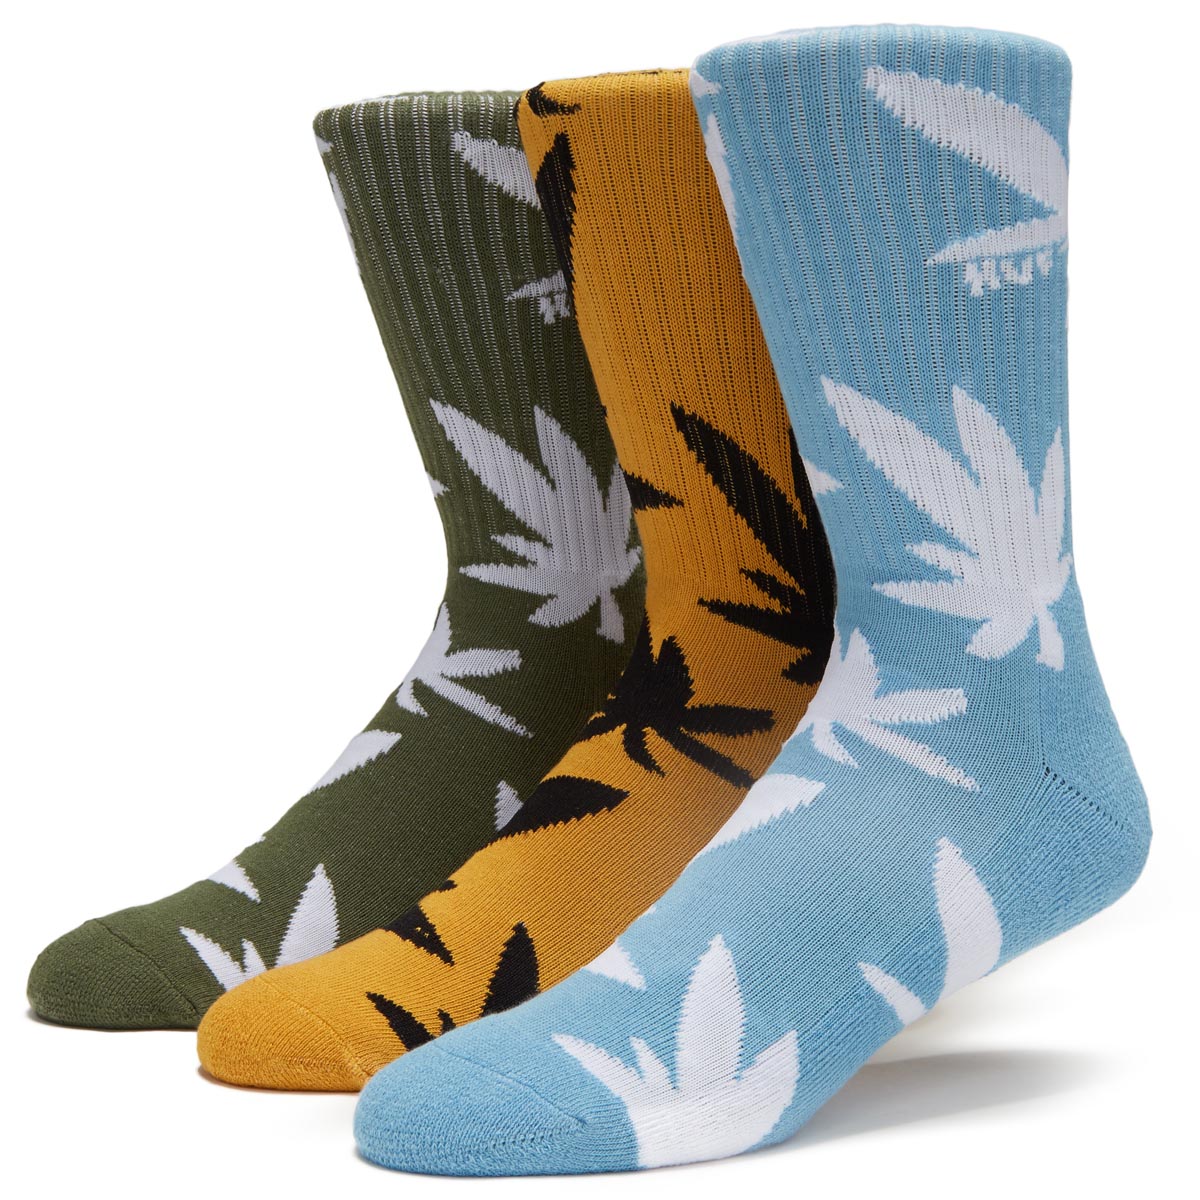 HUF Abstract 3 Pack of Socks - Blue/Yellow/Green image 1